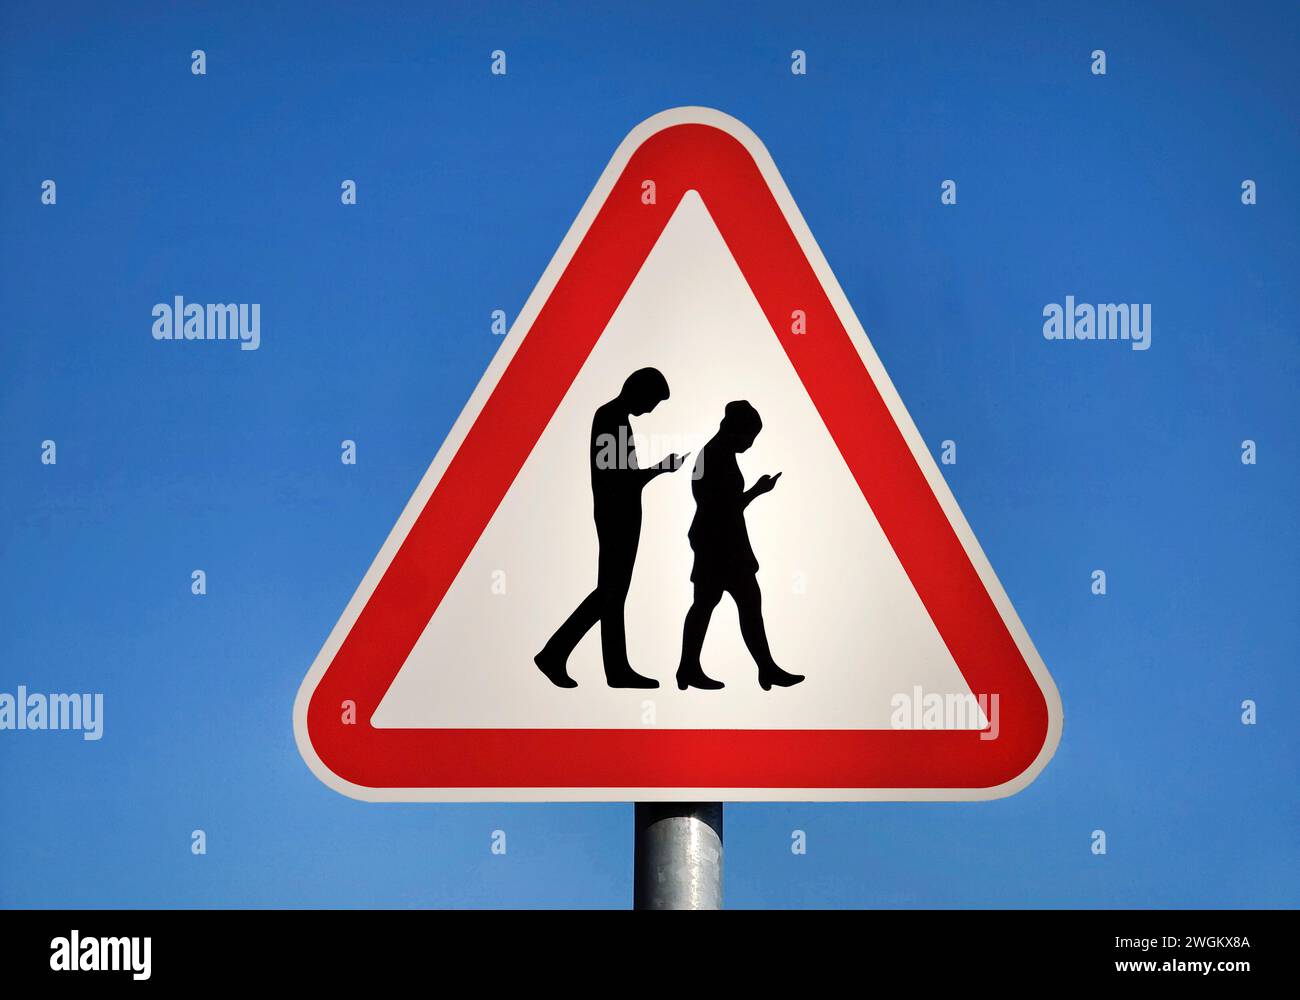 Fictitious traffic sign Danger from cell phone users, photomontage Stock Photo